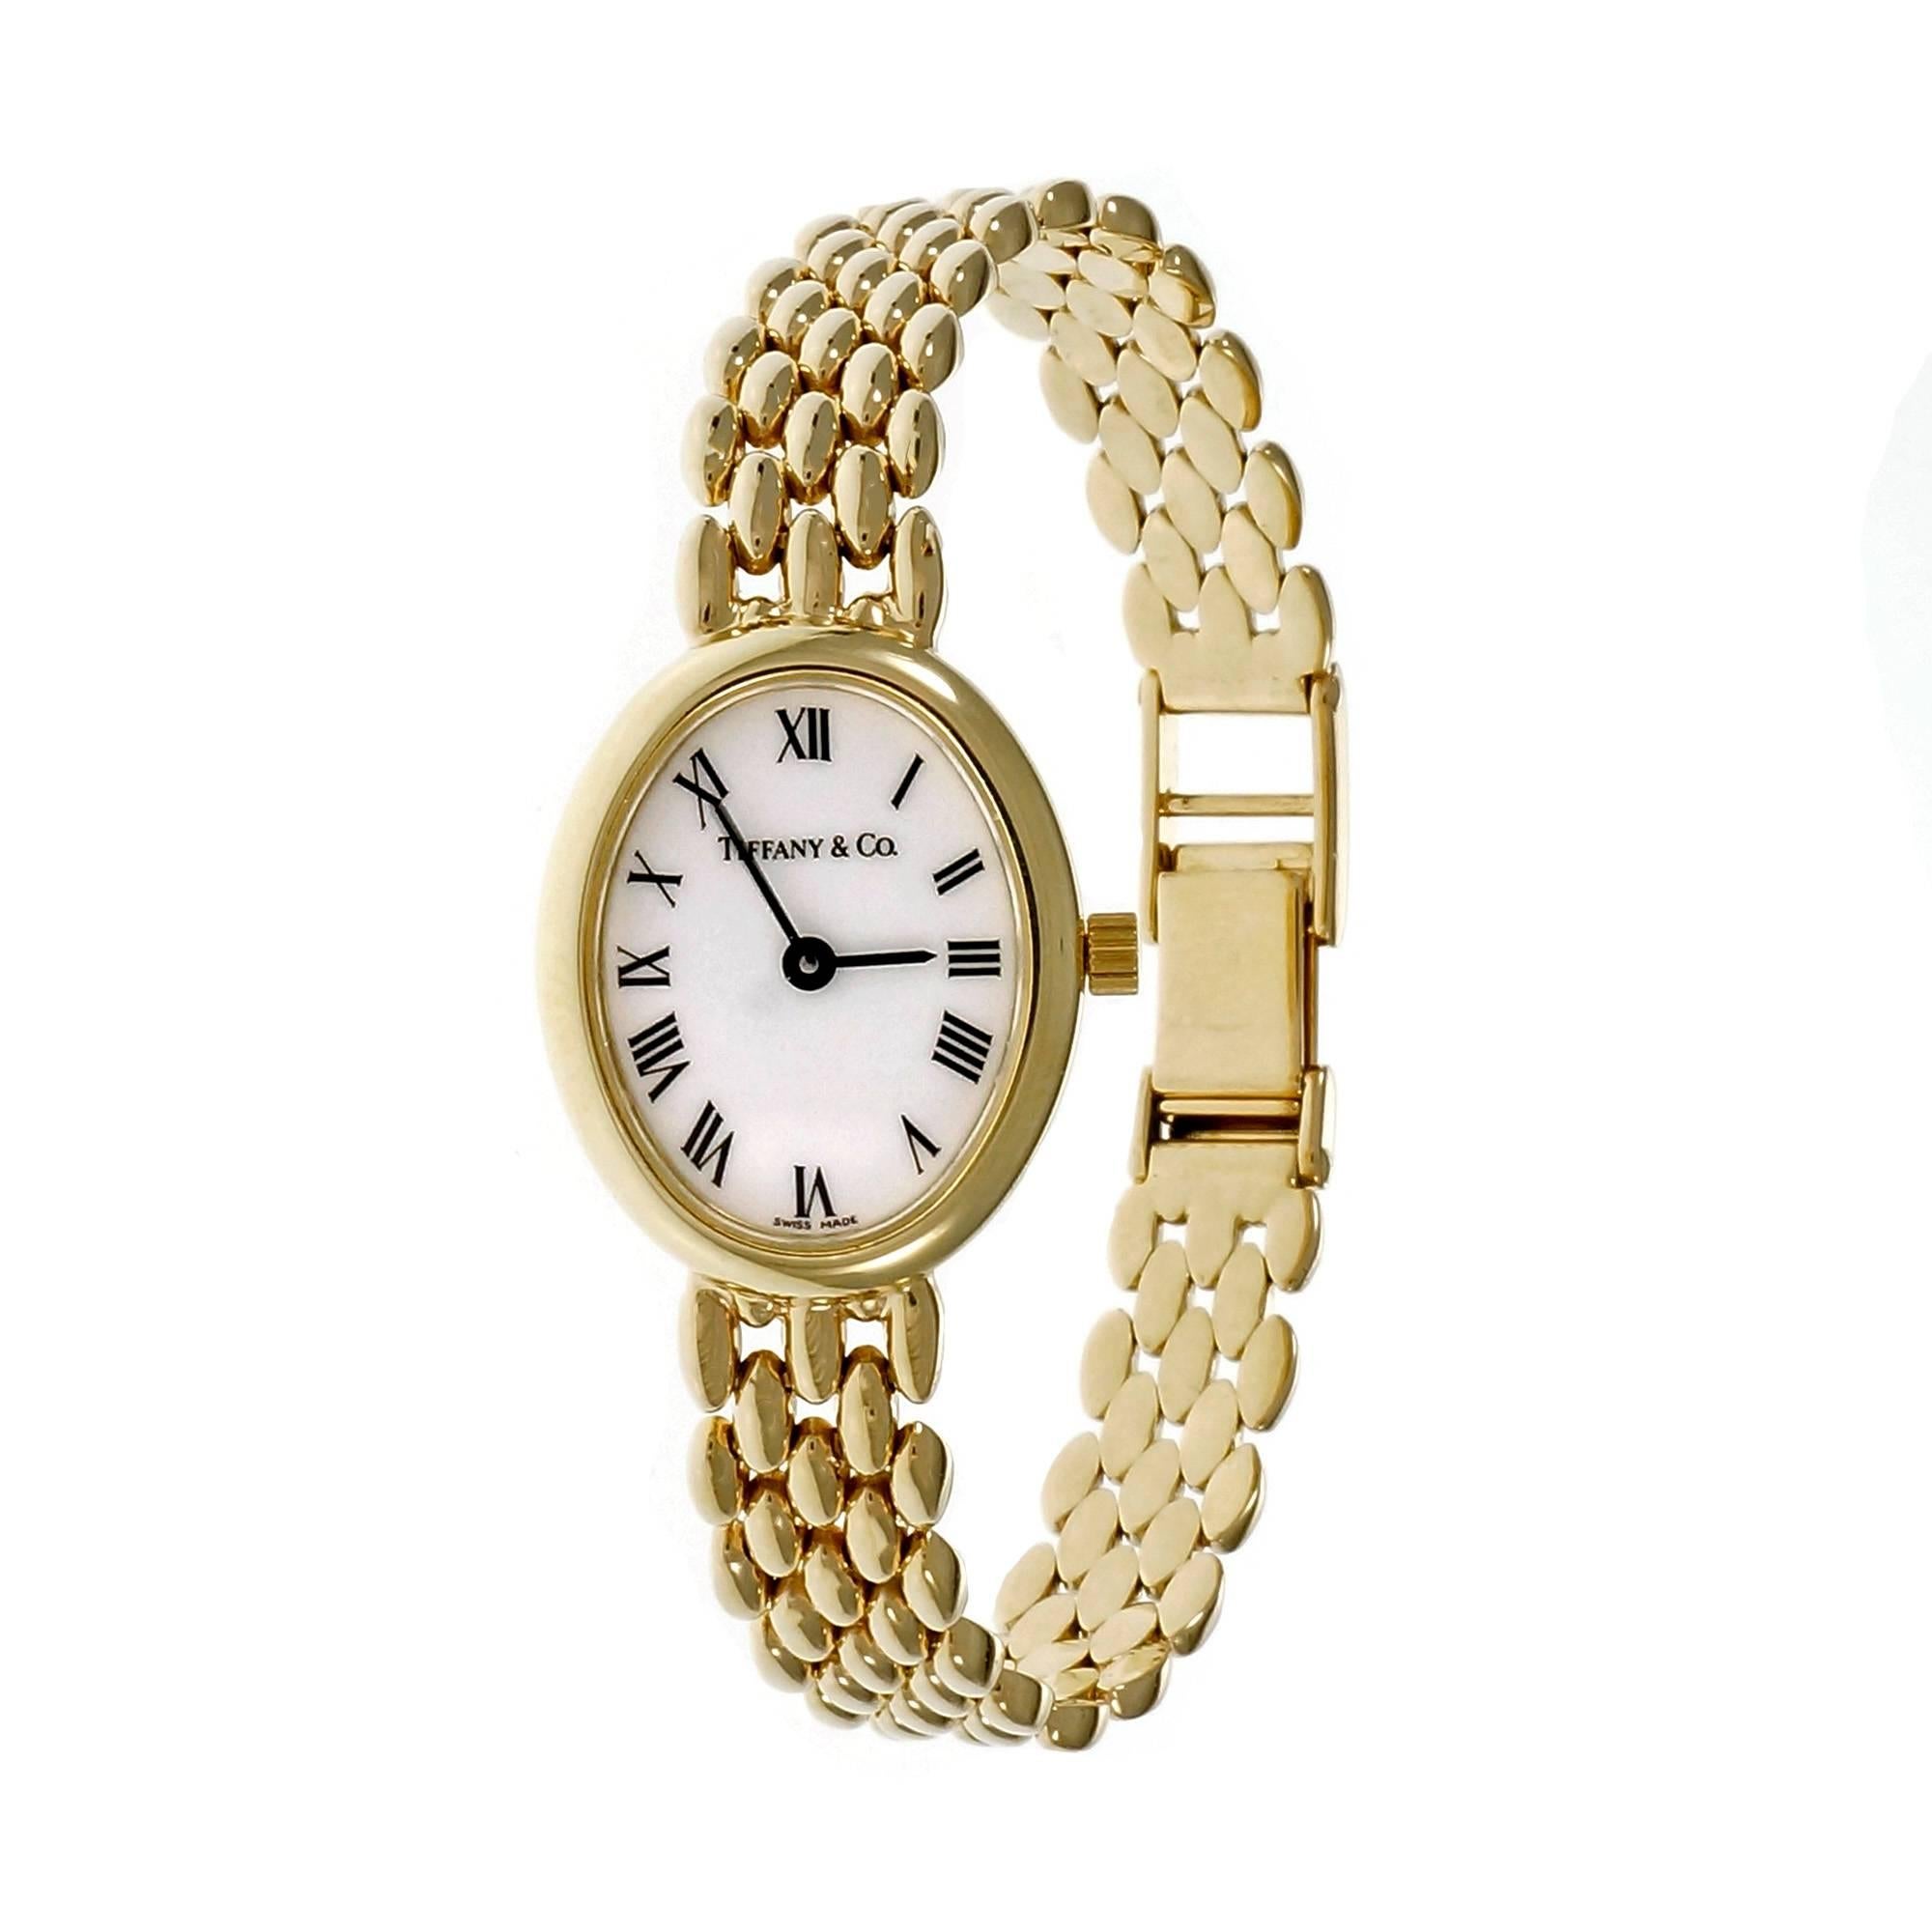 Oval Tiffany & Co 14k gold ladies wrist watch with five row Panther link bracelet. Reliable Quartz movement.

14k yellow gold
26.5 grams
Bracelet length: 7.25 inches
Length: 24mm
Width:19.5
Band width at case: 9mm
Case thickness: 5.45mm
Band: